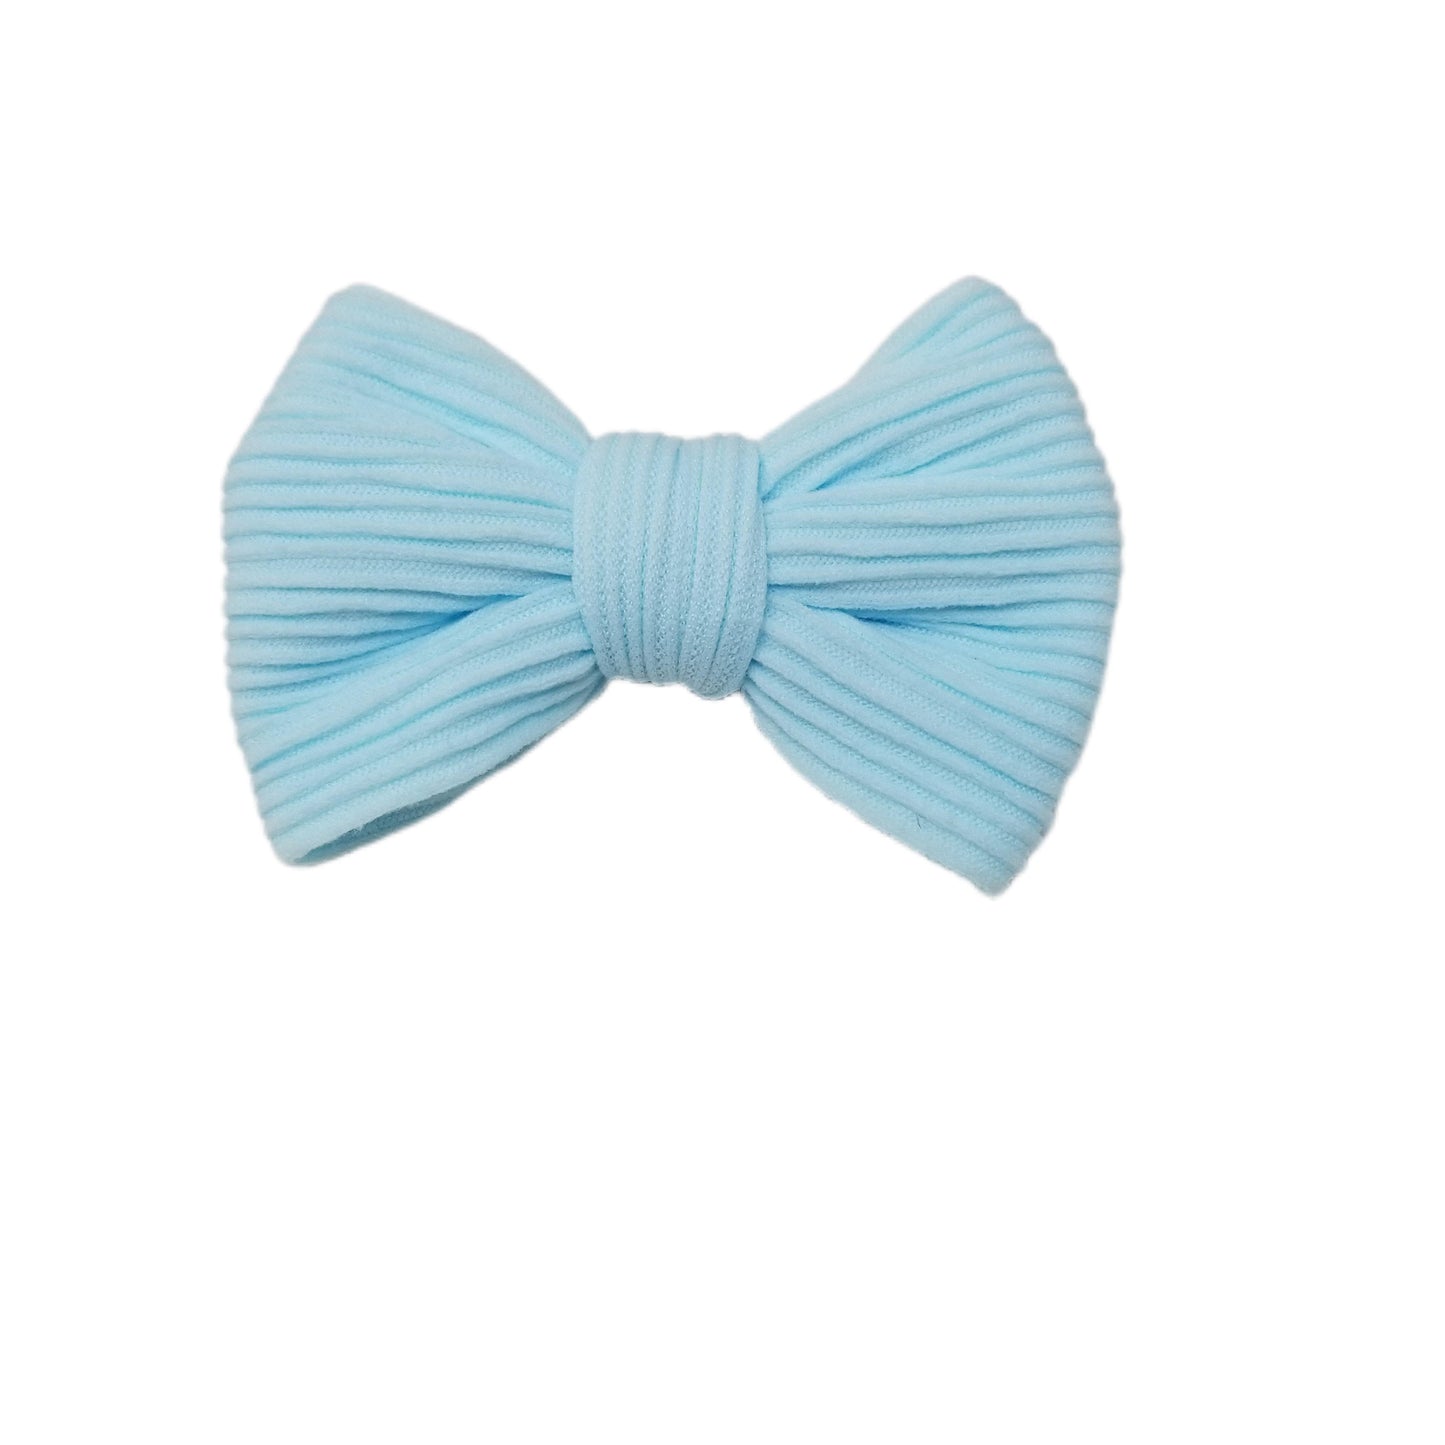 Ribbed Knit Nylon Bow Headwrap 4" - Waterfall Wishes